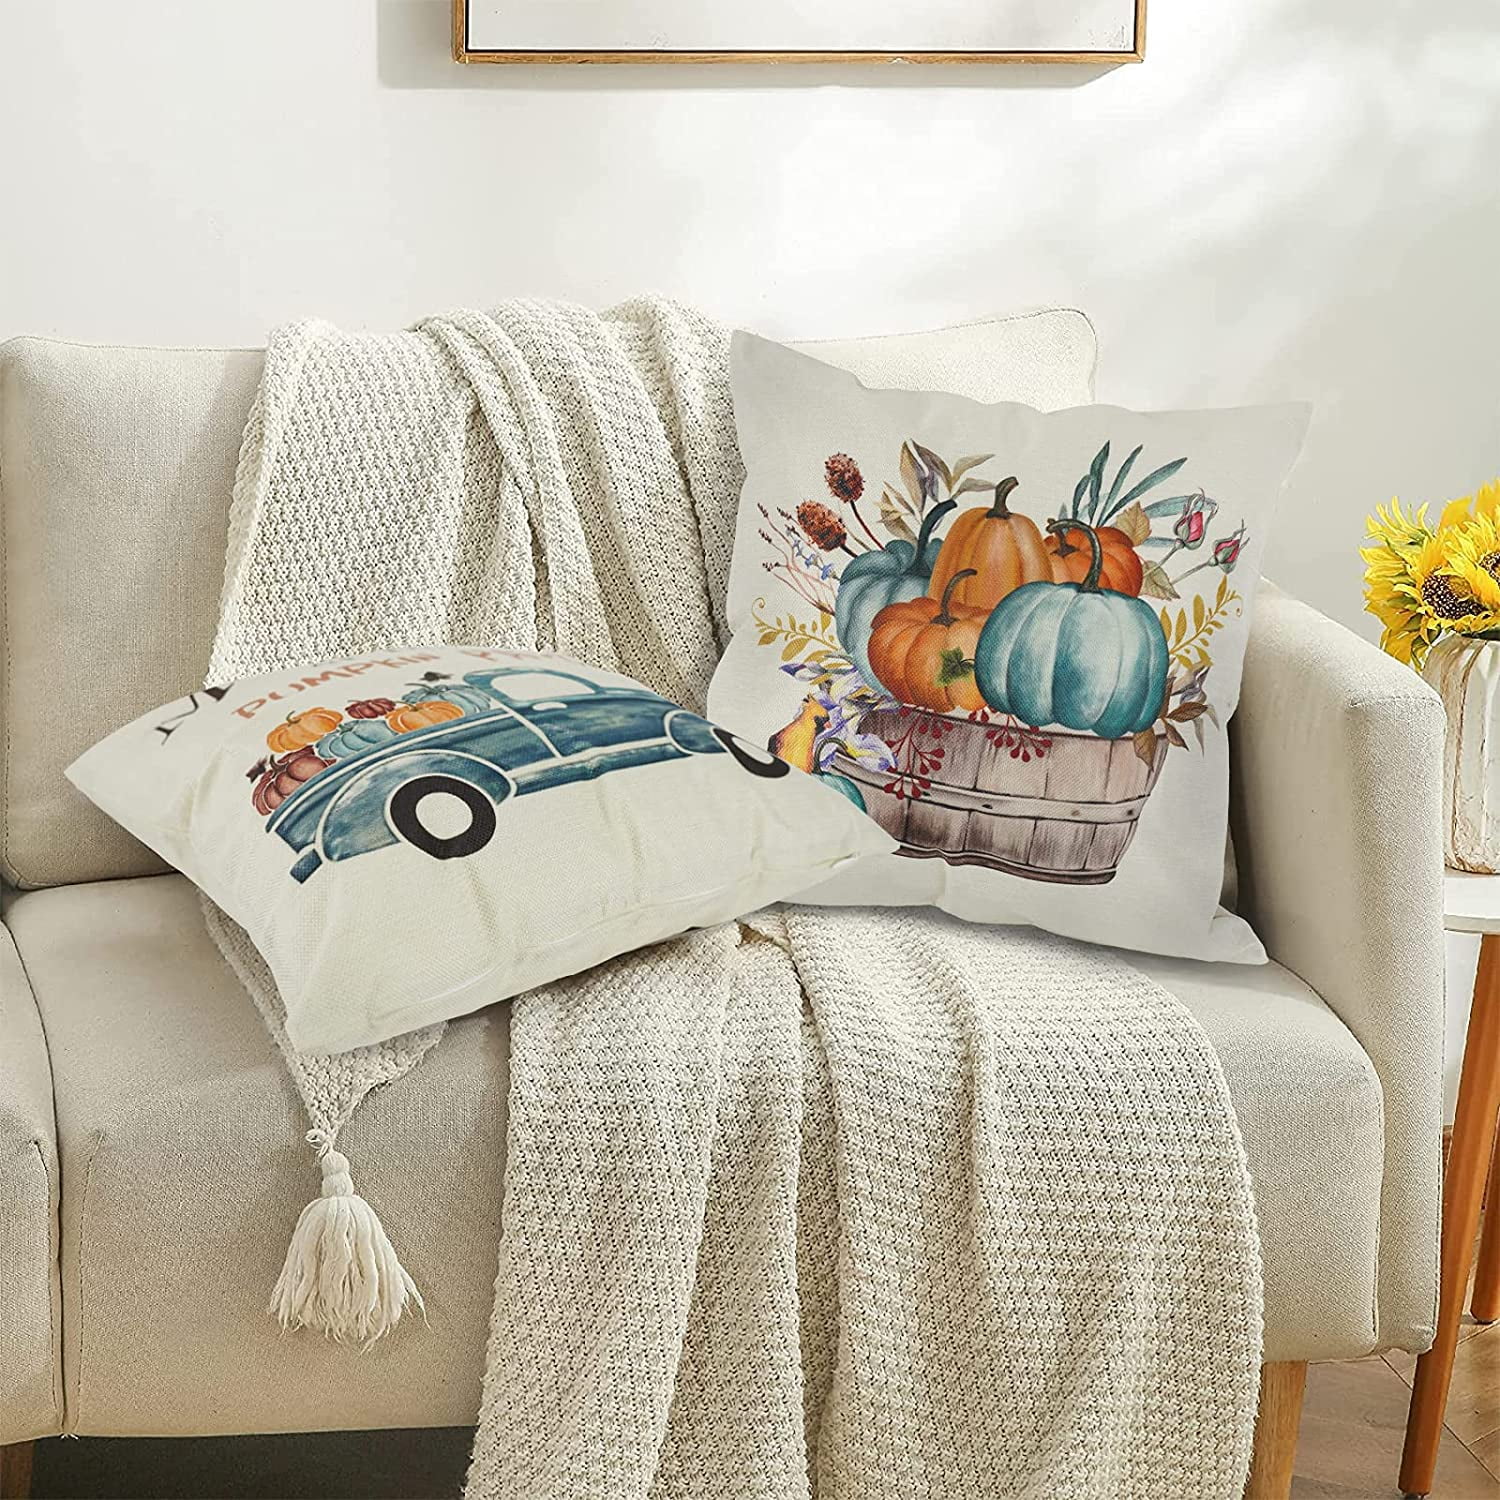 Gnome for the Holidays 18x18 Pillow Cover – Lofty Living Shop